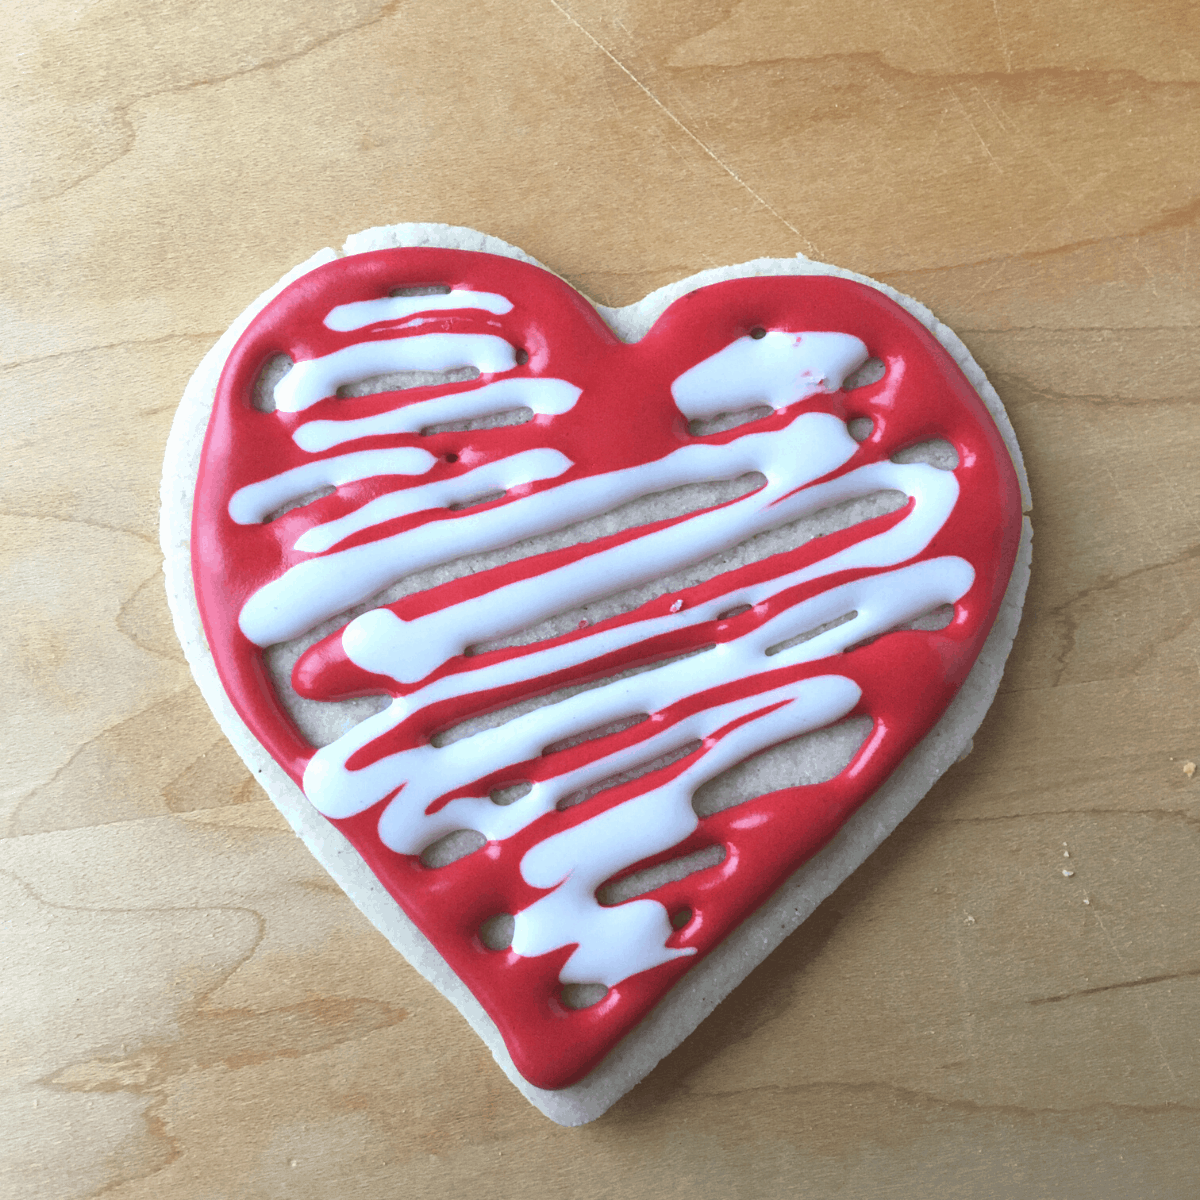 A heart sugar cookie with white and red vegan royal icing